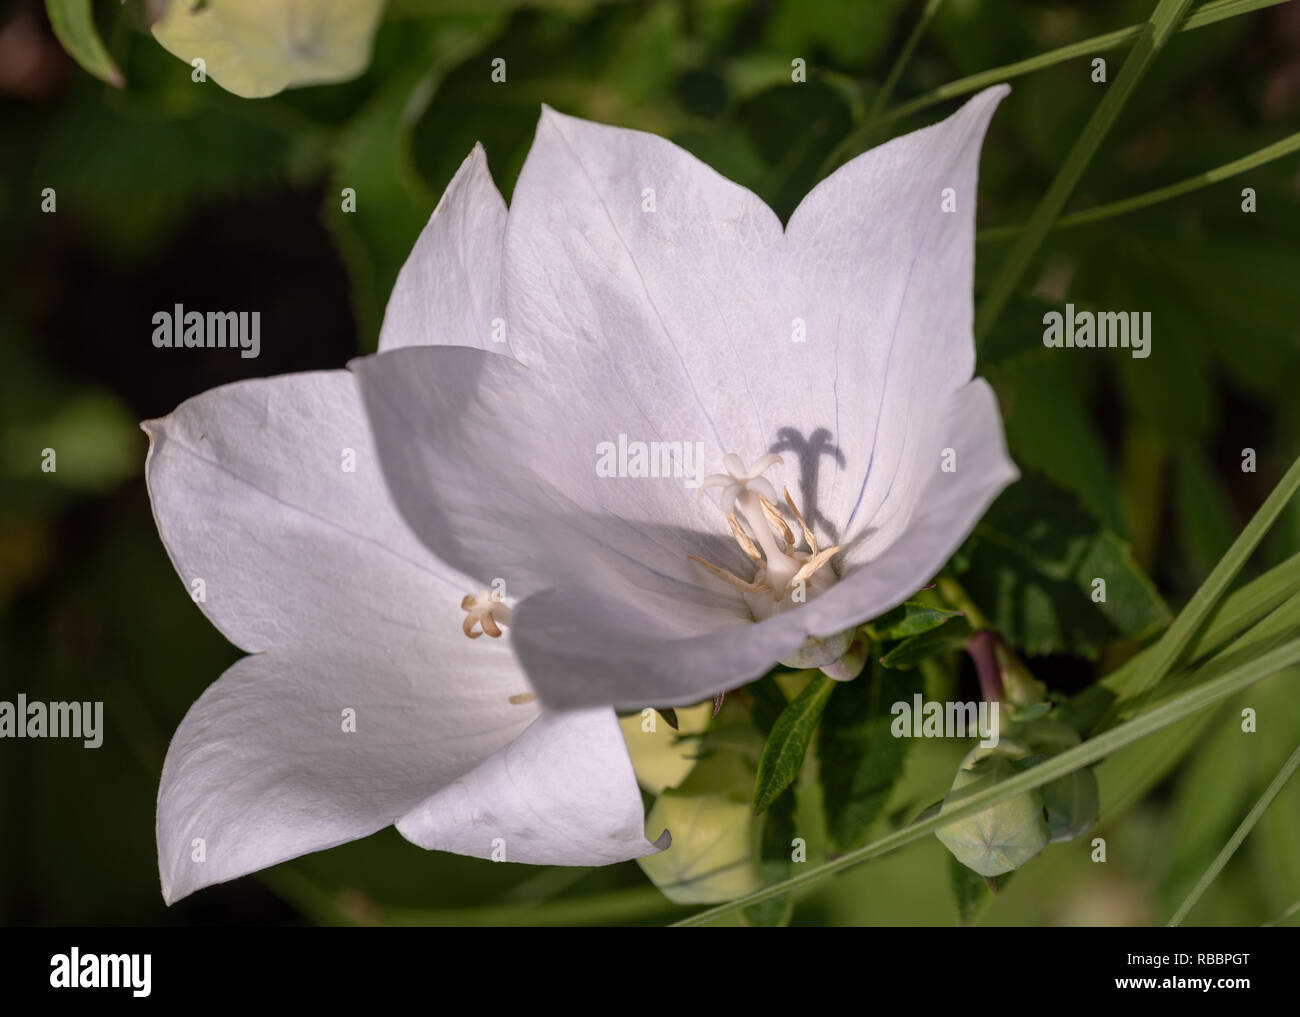 Color outdoor natural floral closeup image of a pair of isolated wide open white  peach-leaved bellflower blossoms on natural green background Stock Photo